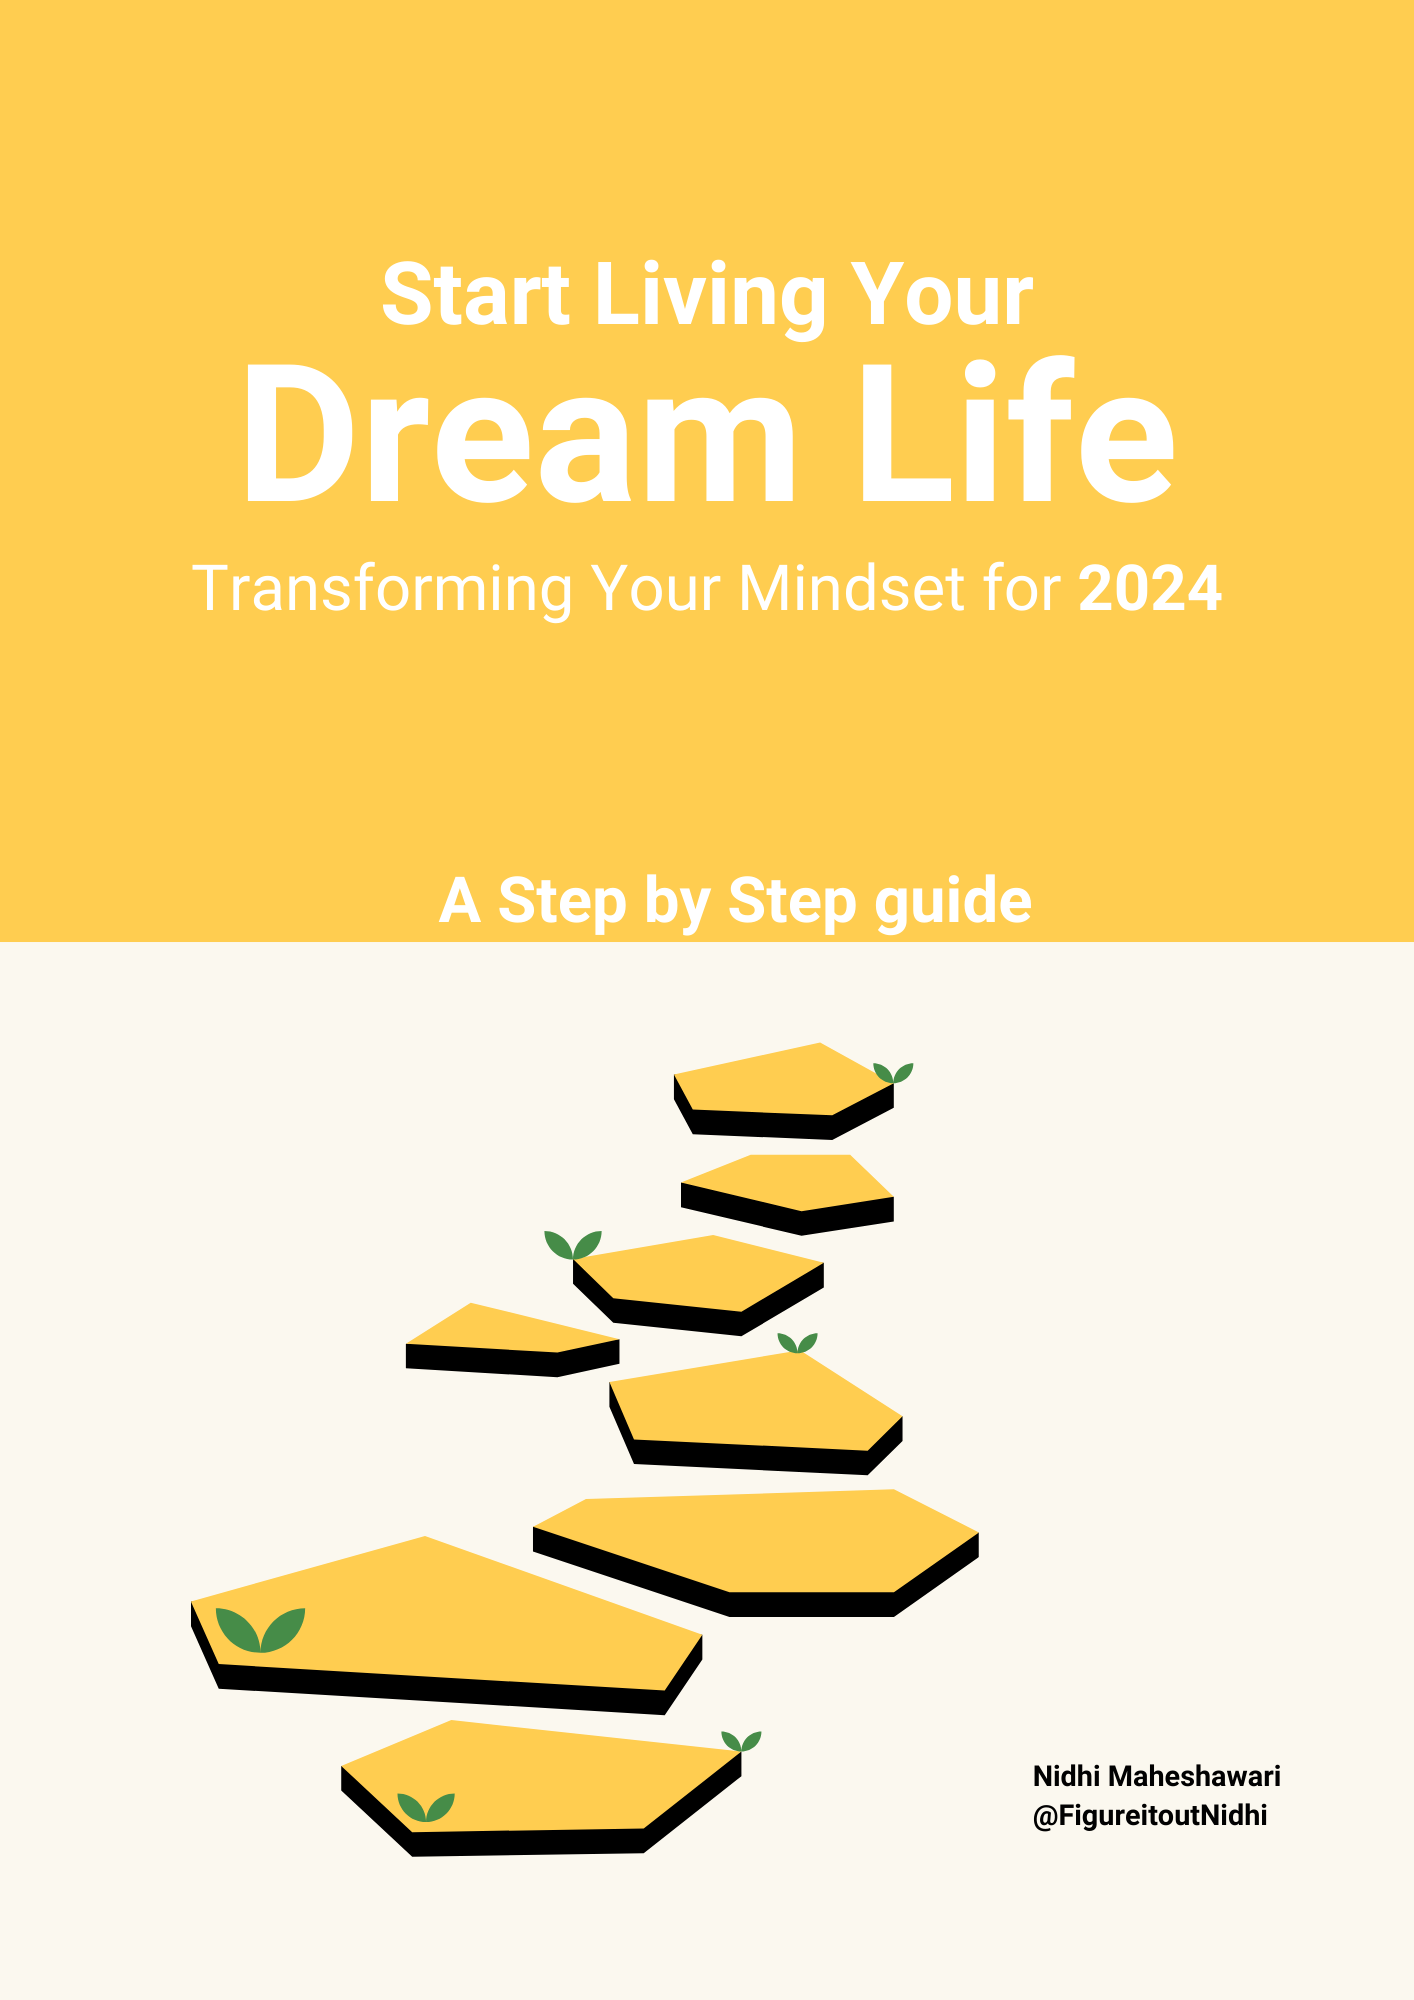 Start Living Your Dream Life- Transforming Your Mindset for 2024 E-book